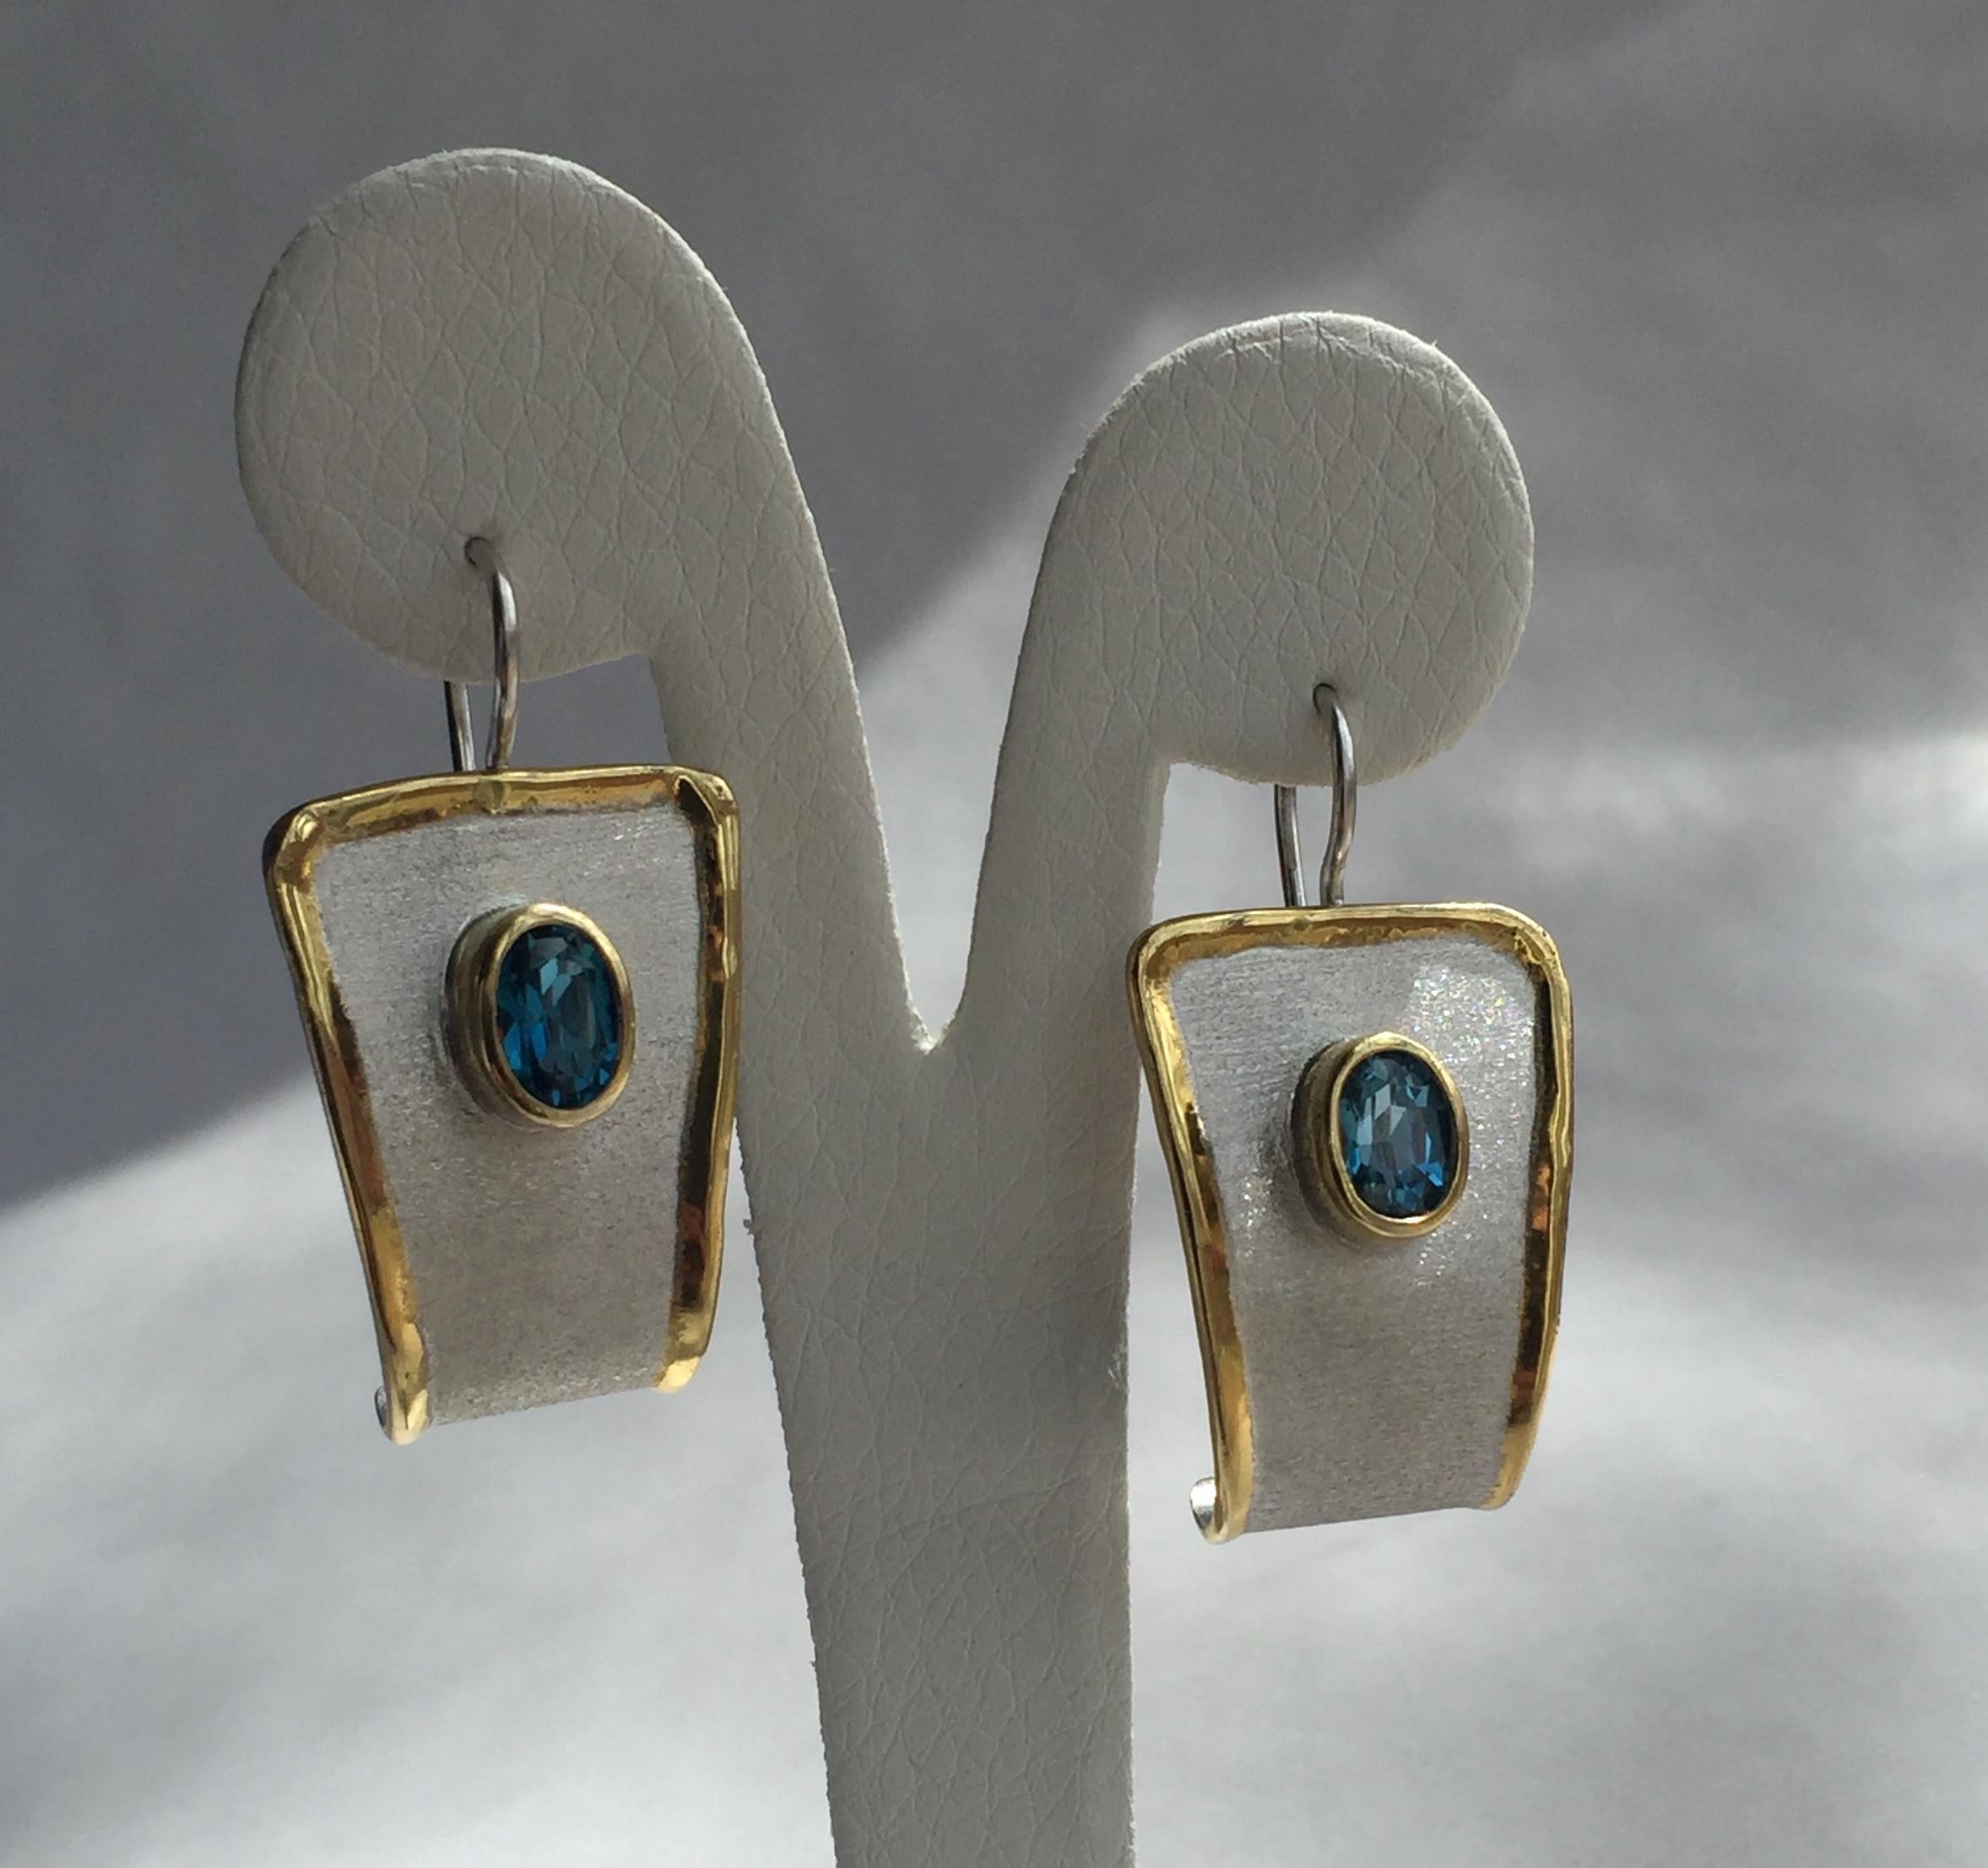 Yianni Creations Midas Collection 100% Handmade Artisan Dangle Earrings from Fine Silver. Each stunning earring features 1.60 Carat Oval Cut London Blue Topaz complemented by unique techniques of craftsmanship - brushed texture and nature-inspired